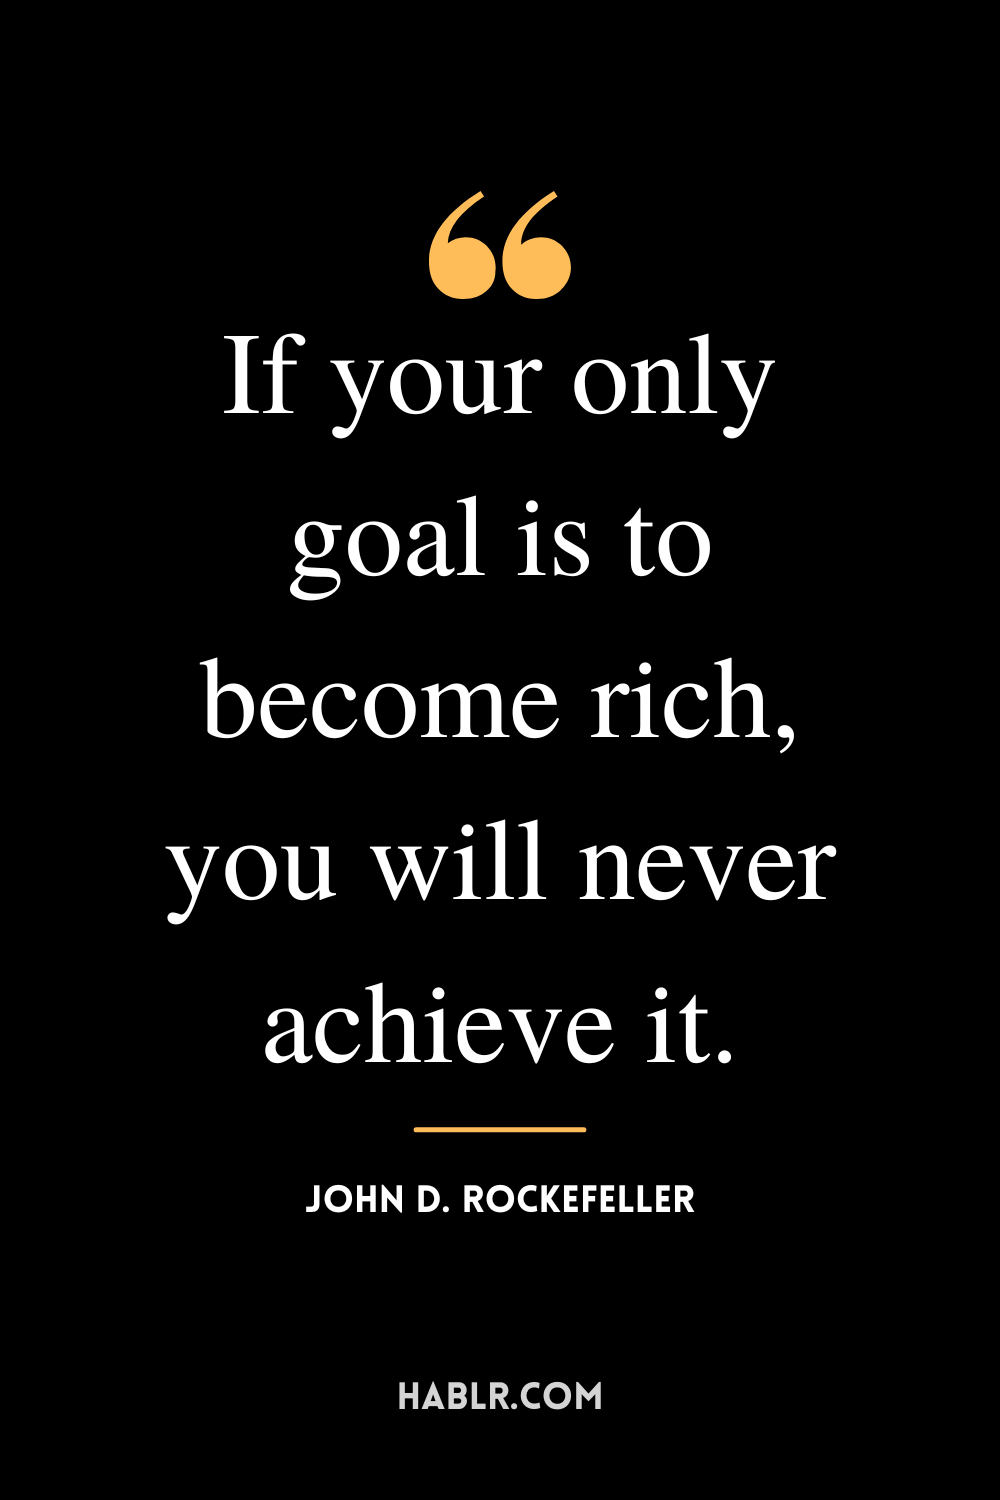 “If your only goal is to become rich, you will never achieve it.” -John D. Rockefeller